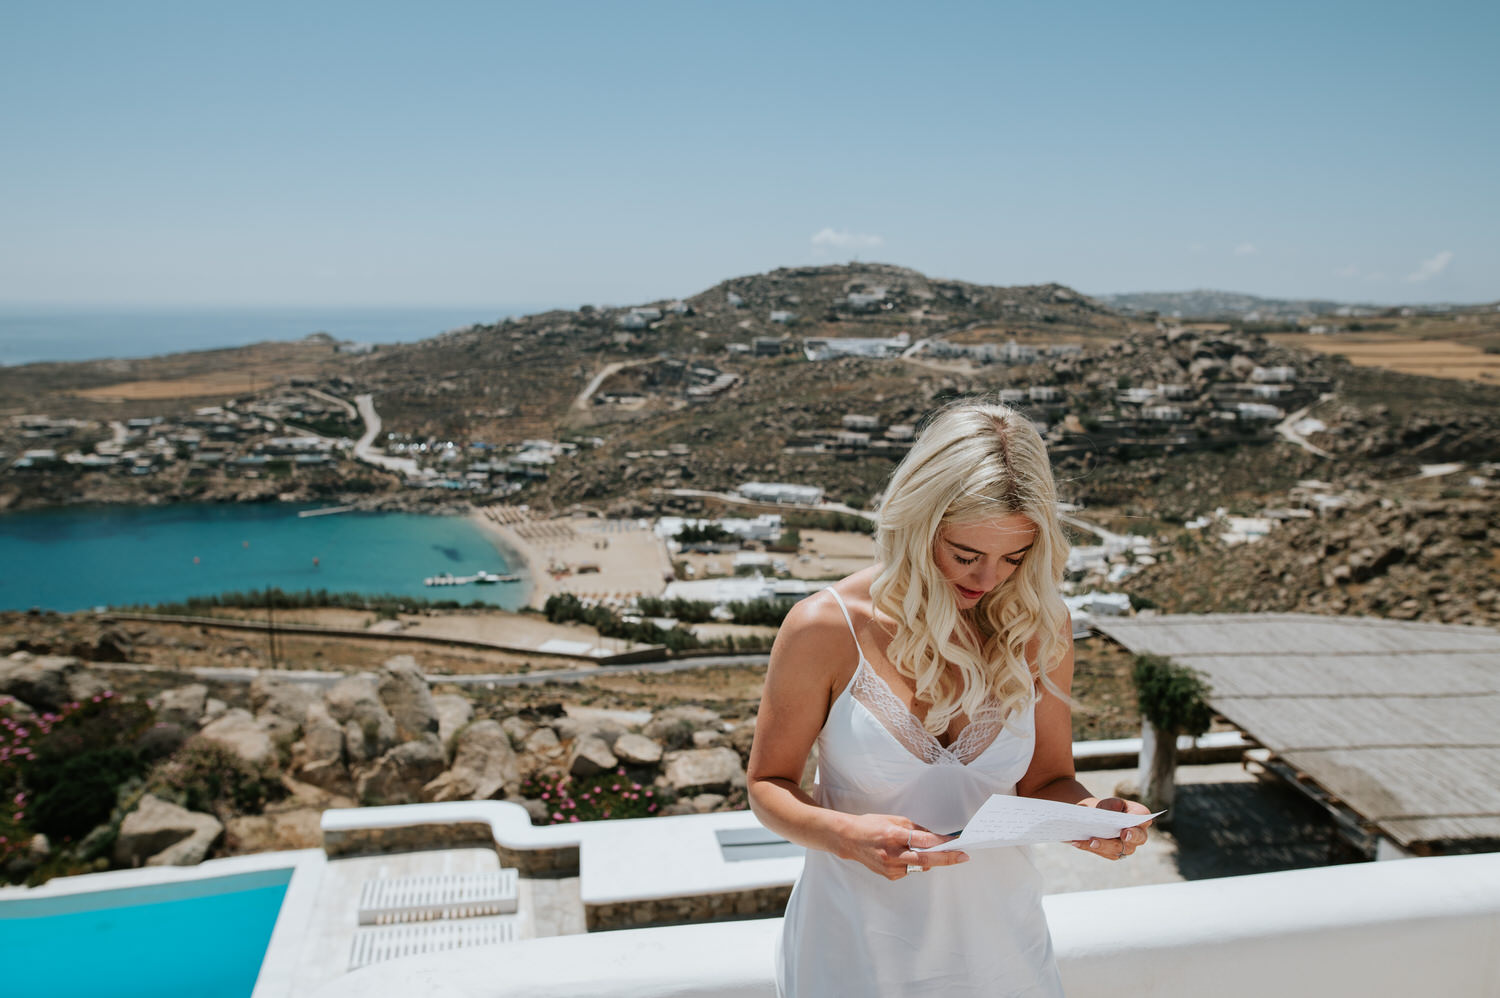 Mykonos wedding photographer: bride leaning on the wall on the terrace with the beach in the background reading a note her husband to be sent.